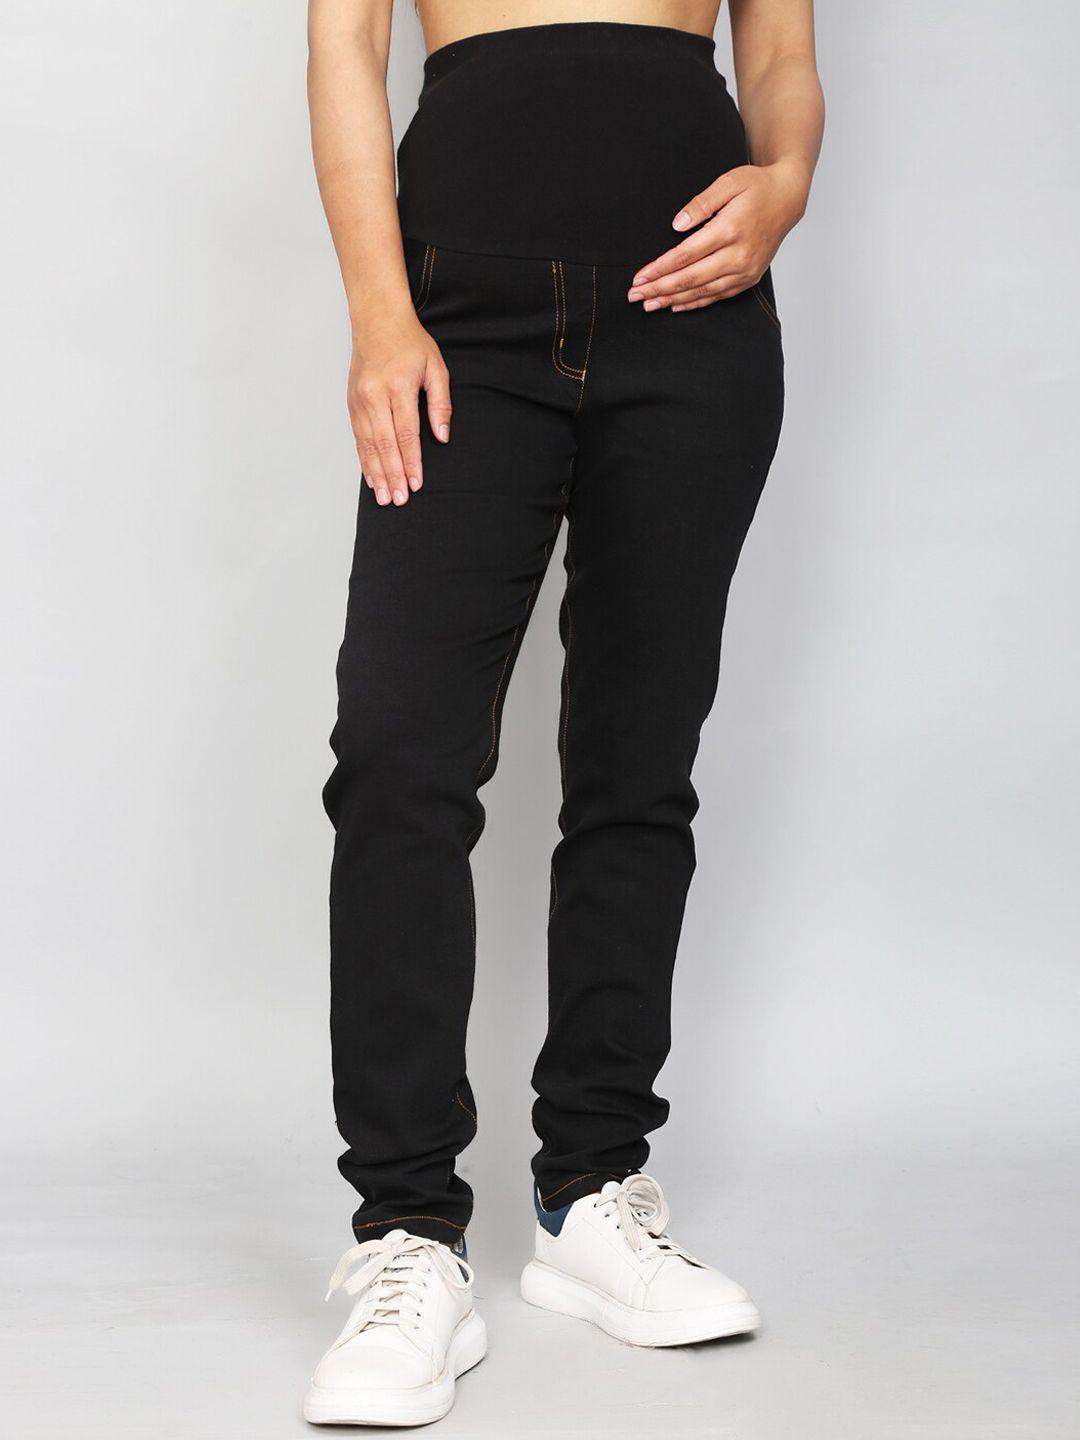 sillyboom-women-solid-maternity-cotton-comfort-pant